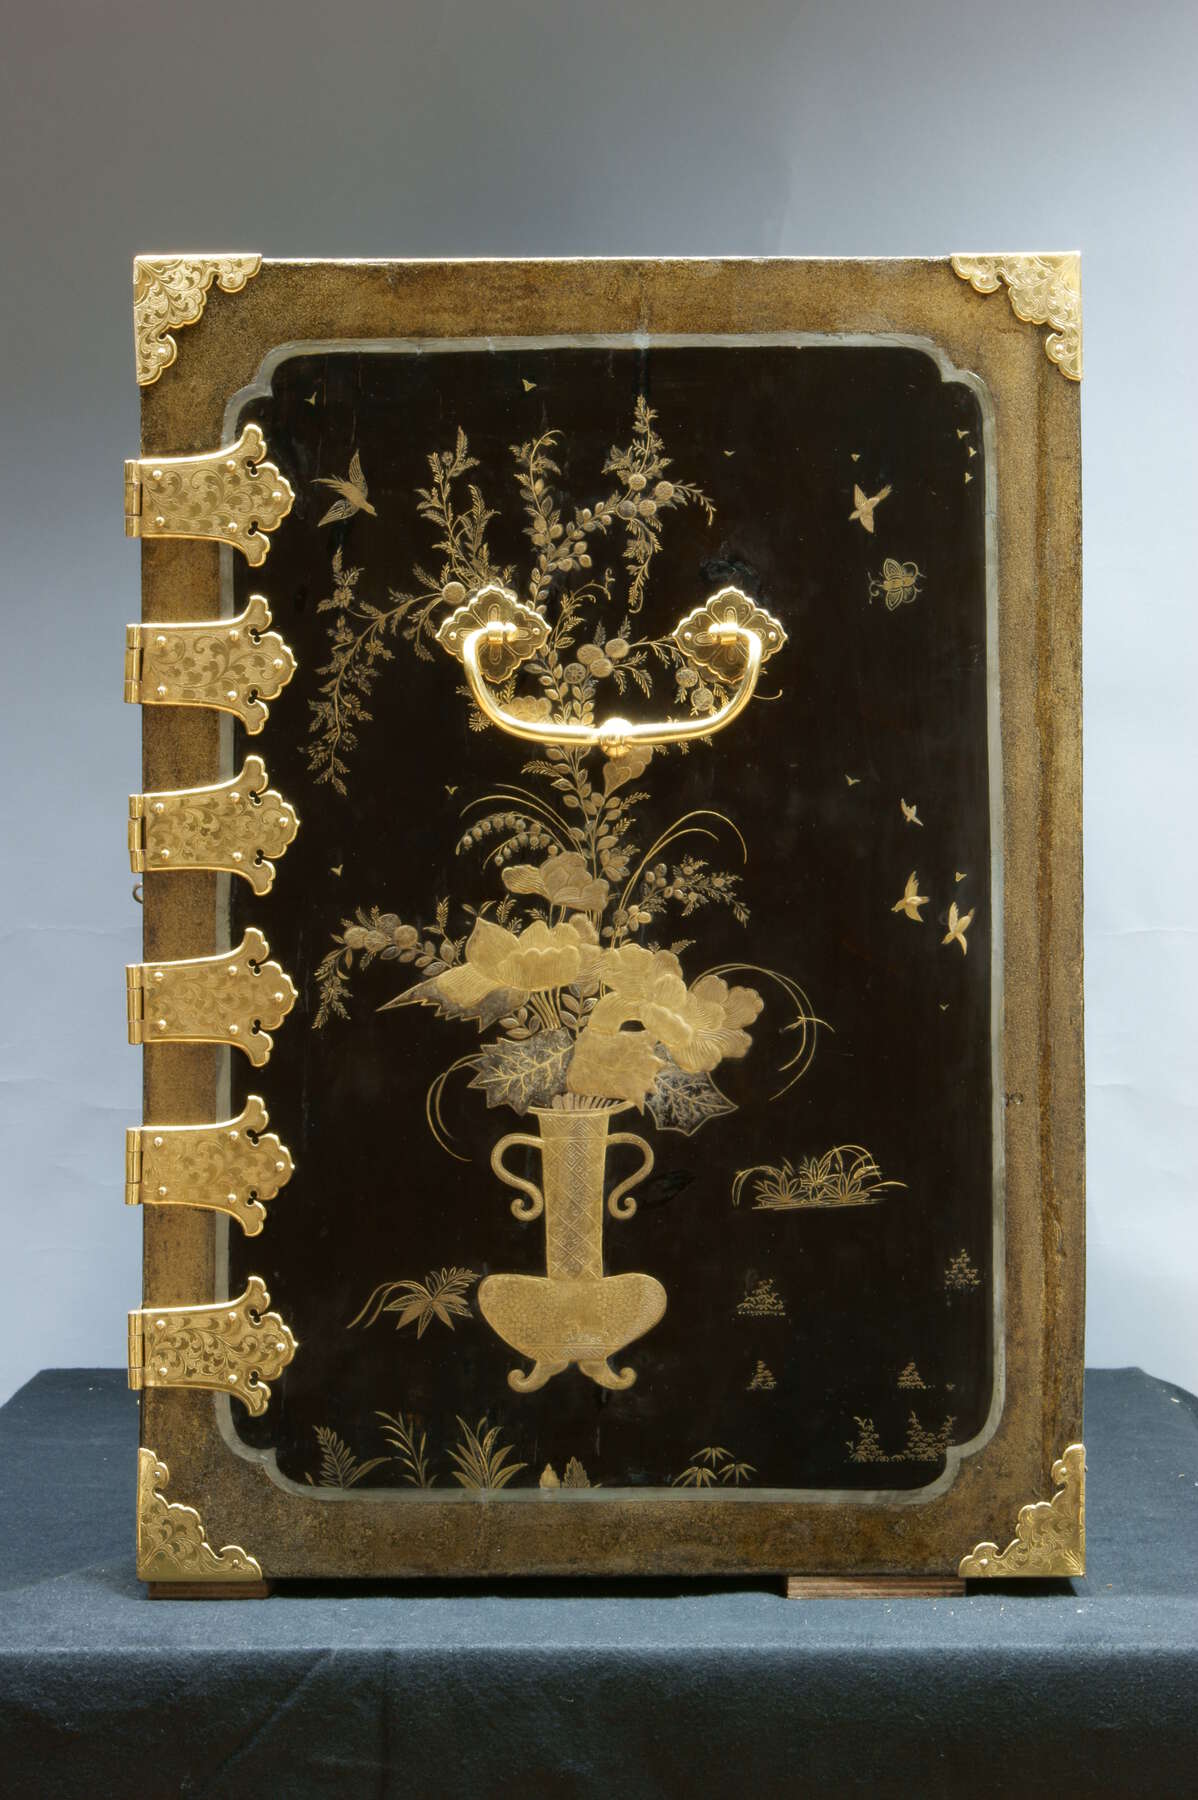 frontal view of the side panel of an additional lacquer cabinet, revealing black and gold lacquer designs of a vase of flowers, birds, and various foliage in a similar design to the side panels of the commode